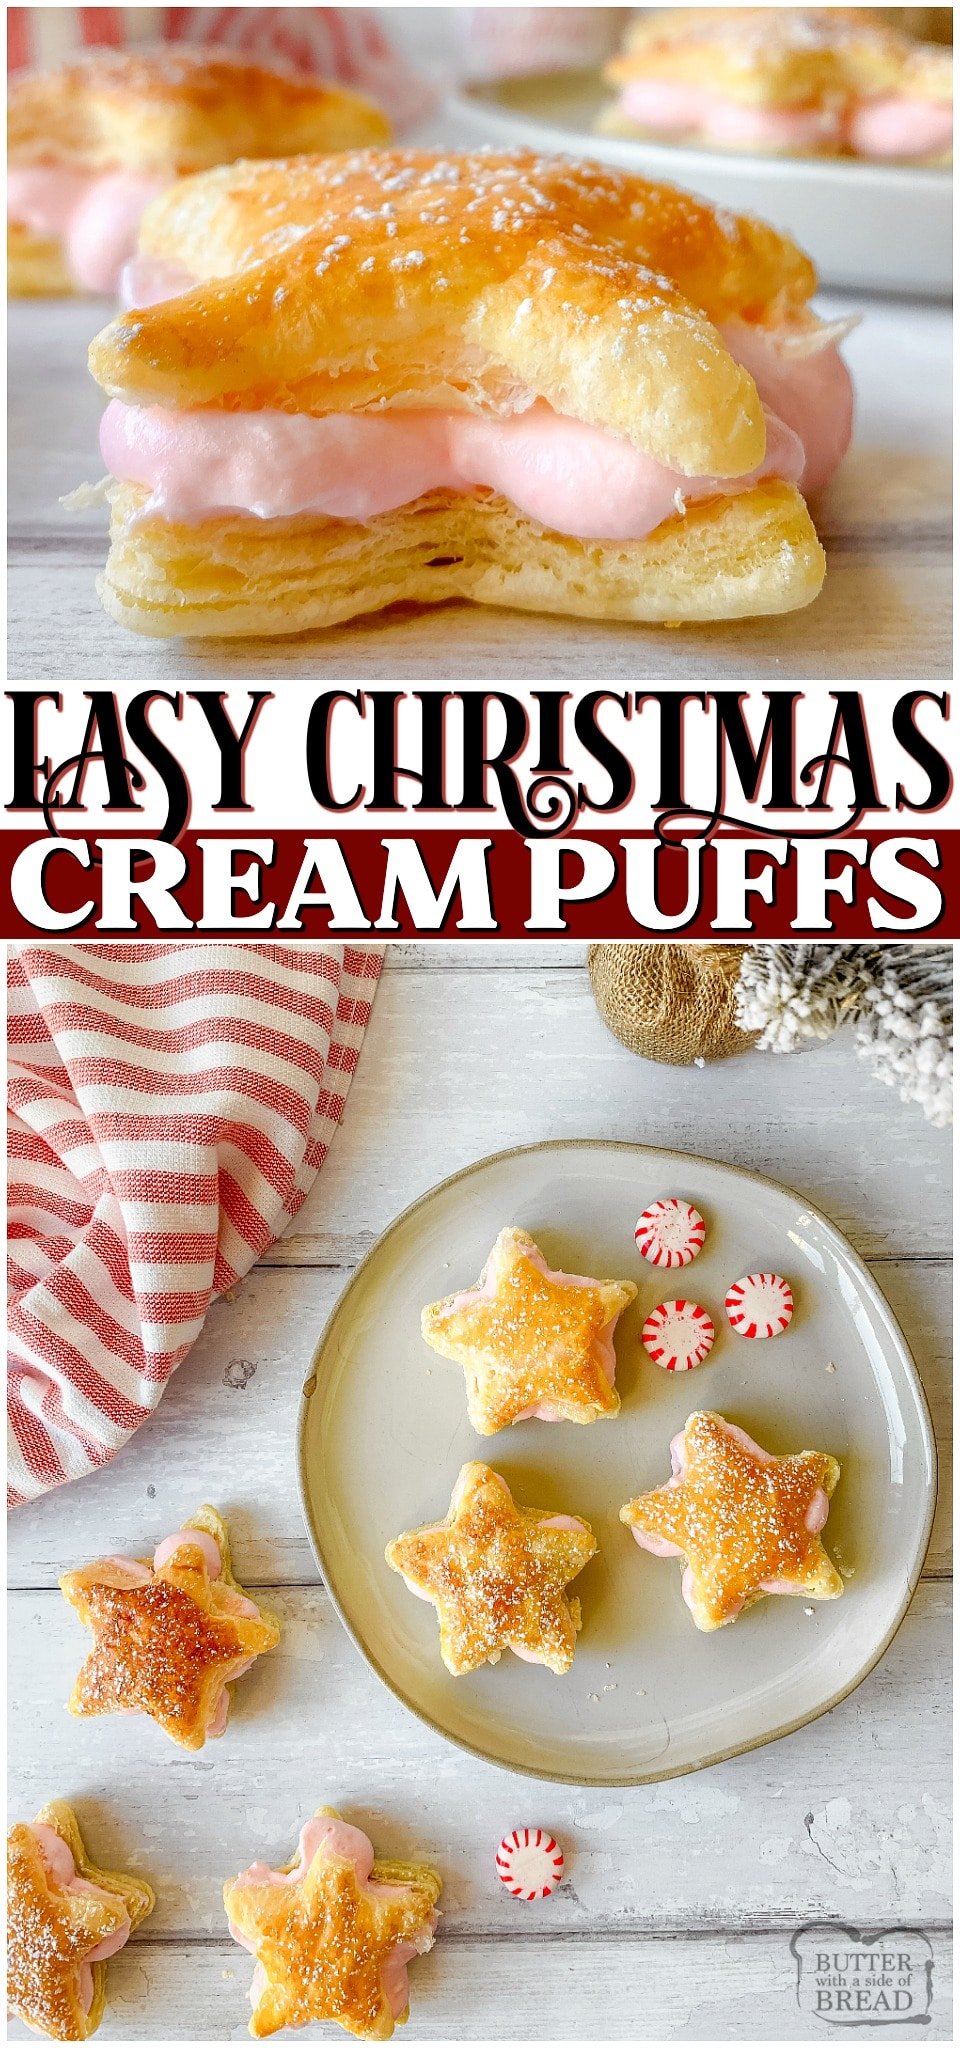 Peppermint Cream Puff Stars are a simple, 4-ingredient cream puffs perfect for Christmas!  With cute peppermint filled puff pastry stars, you can have a festive dessert that's so easy to make!